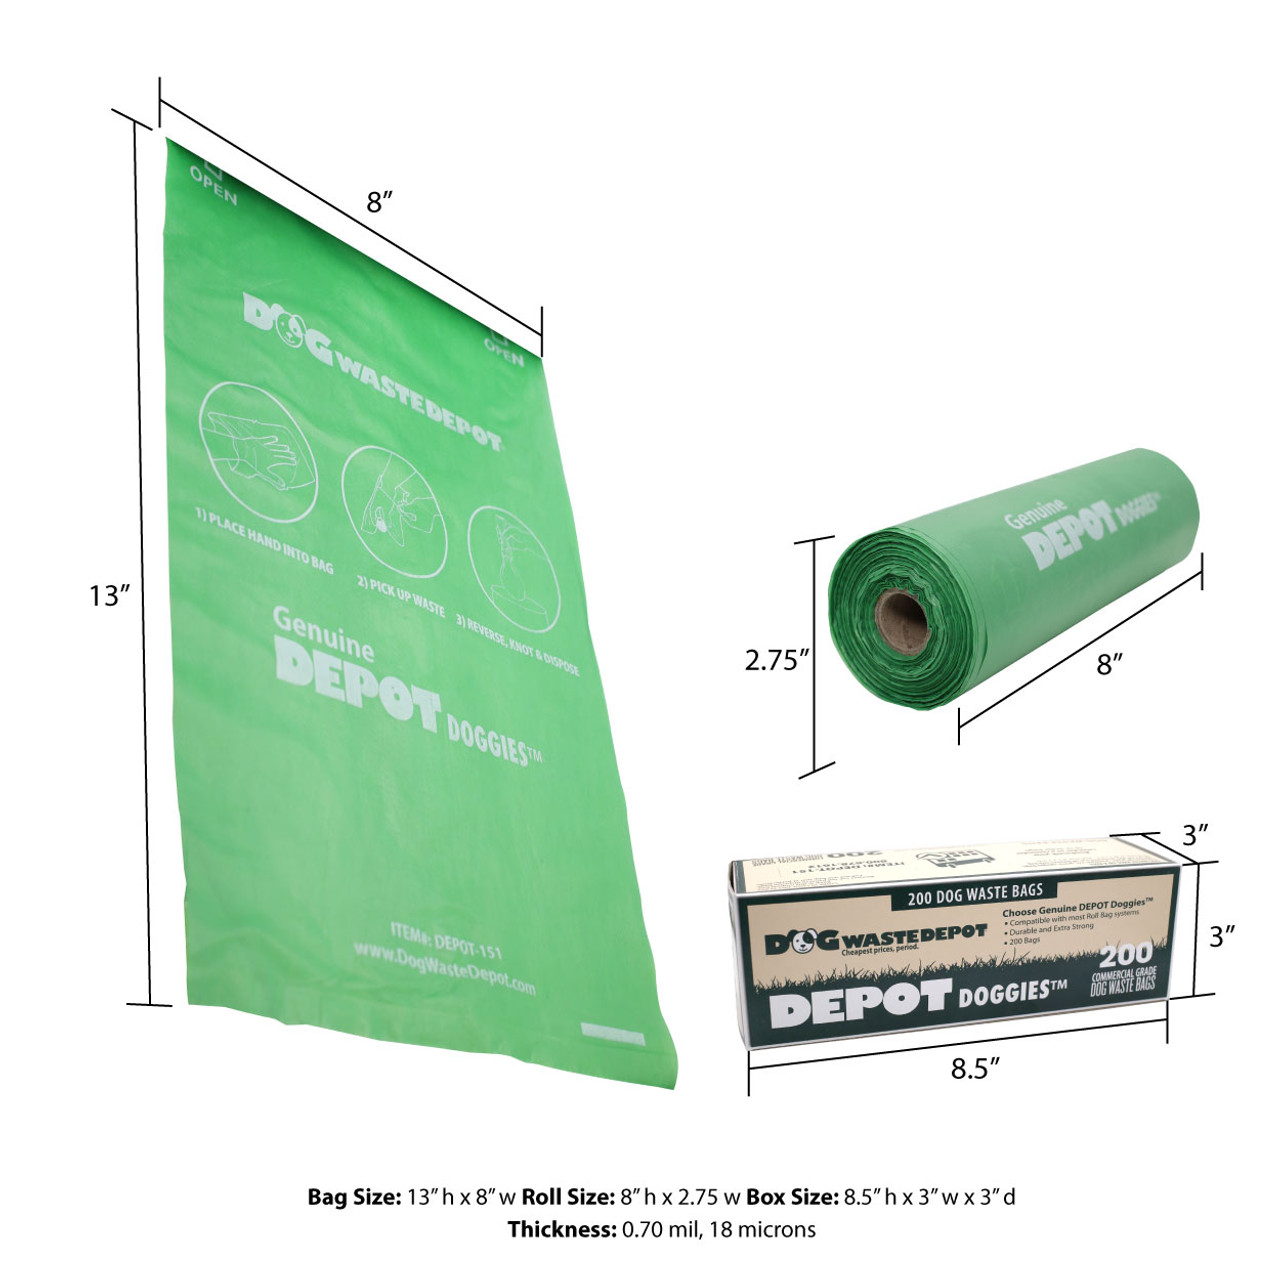 Depot Doggies™ Roll Bags- Dog Waste Station Refill Bags - Green 10 Rolls (2,000 bags)